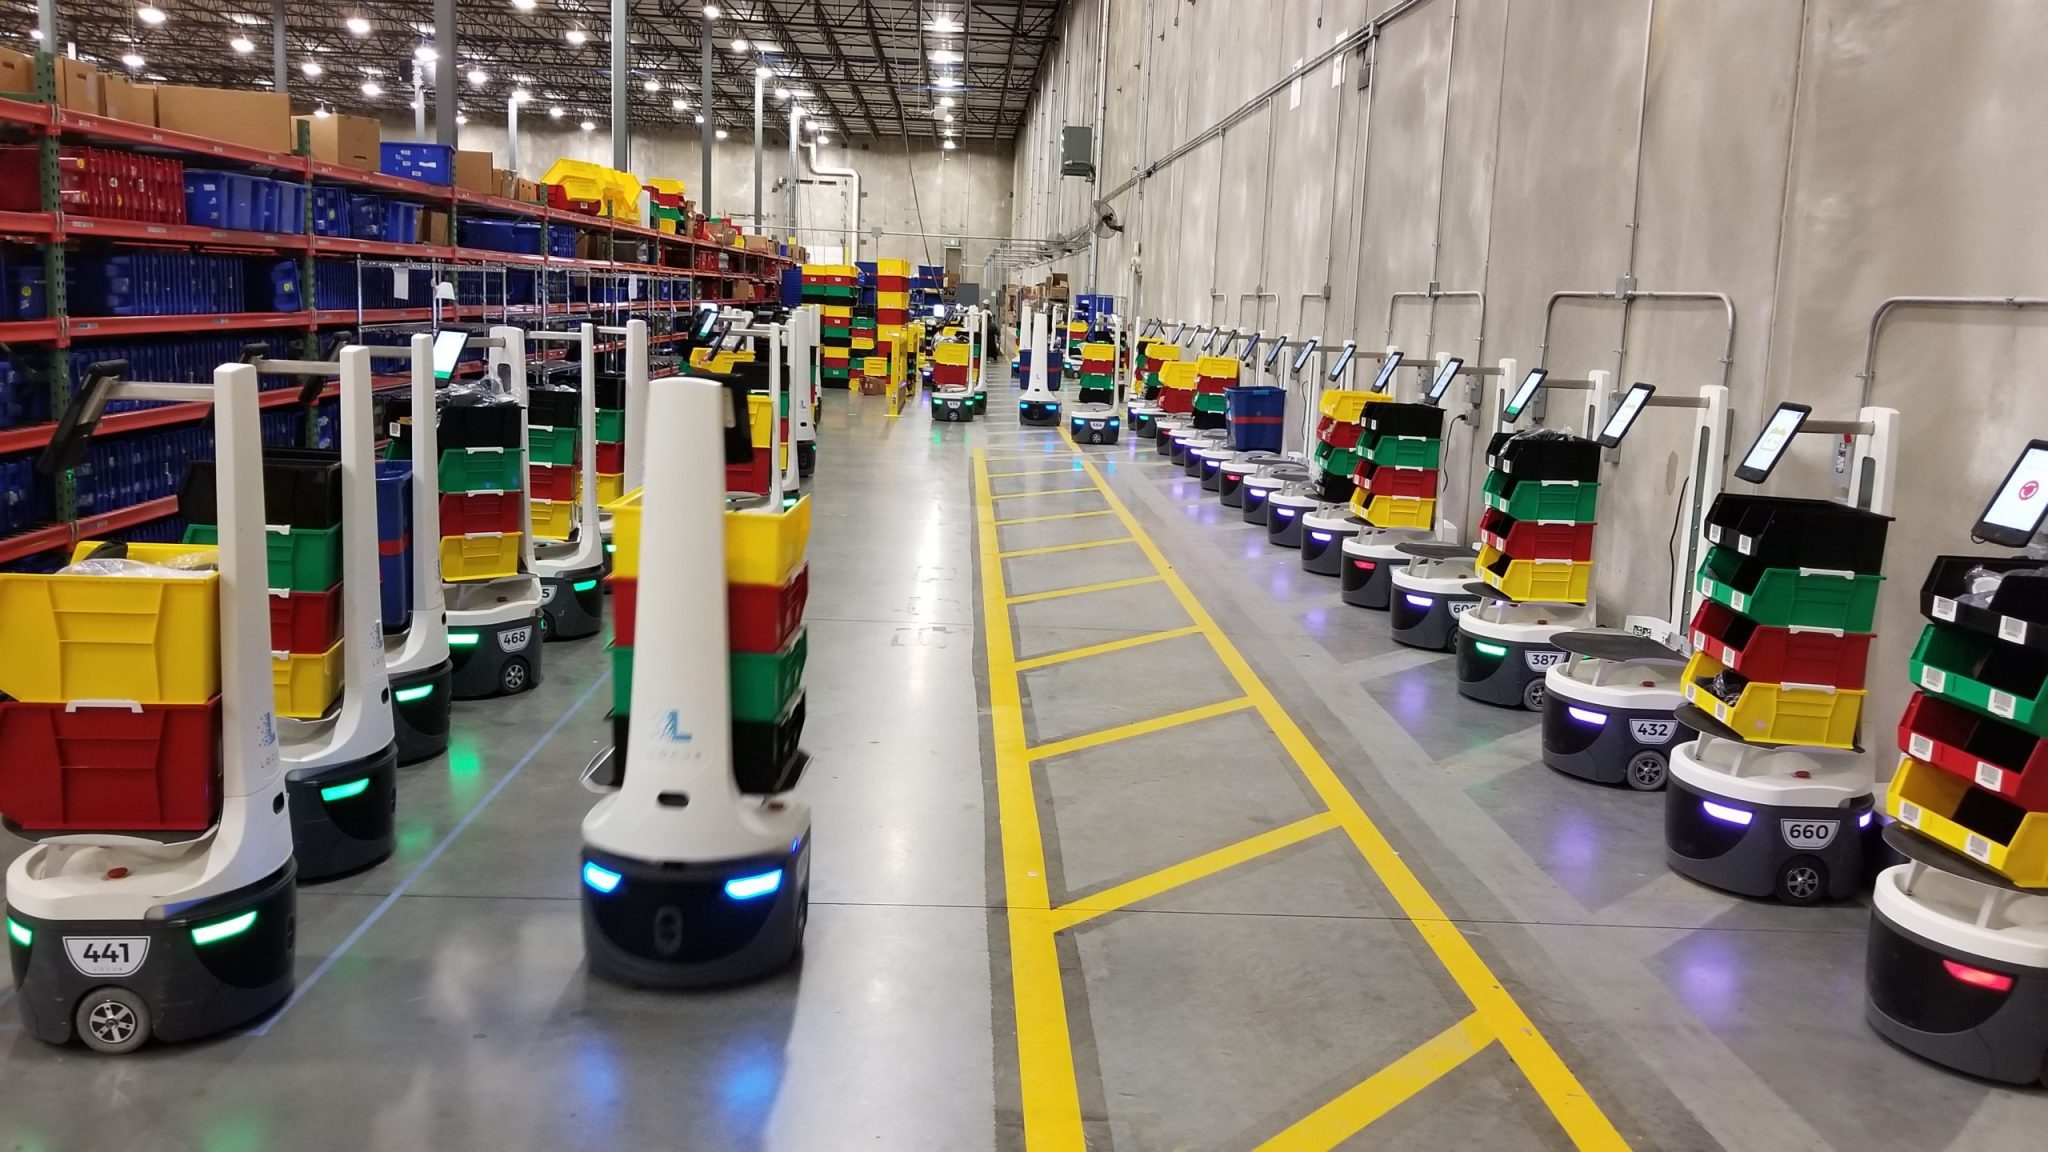 Locus robots lined up in a warehouse.